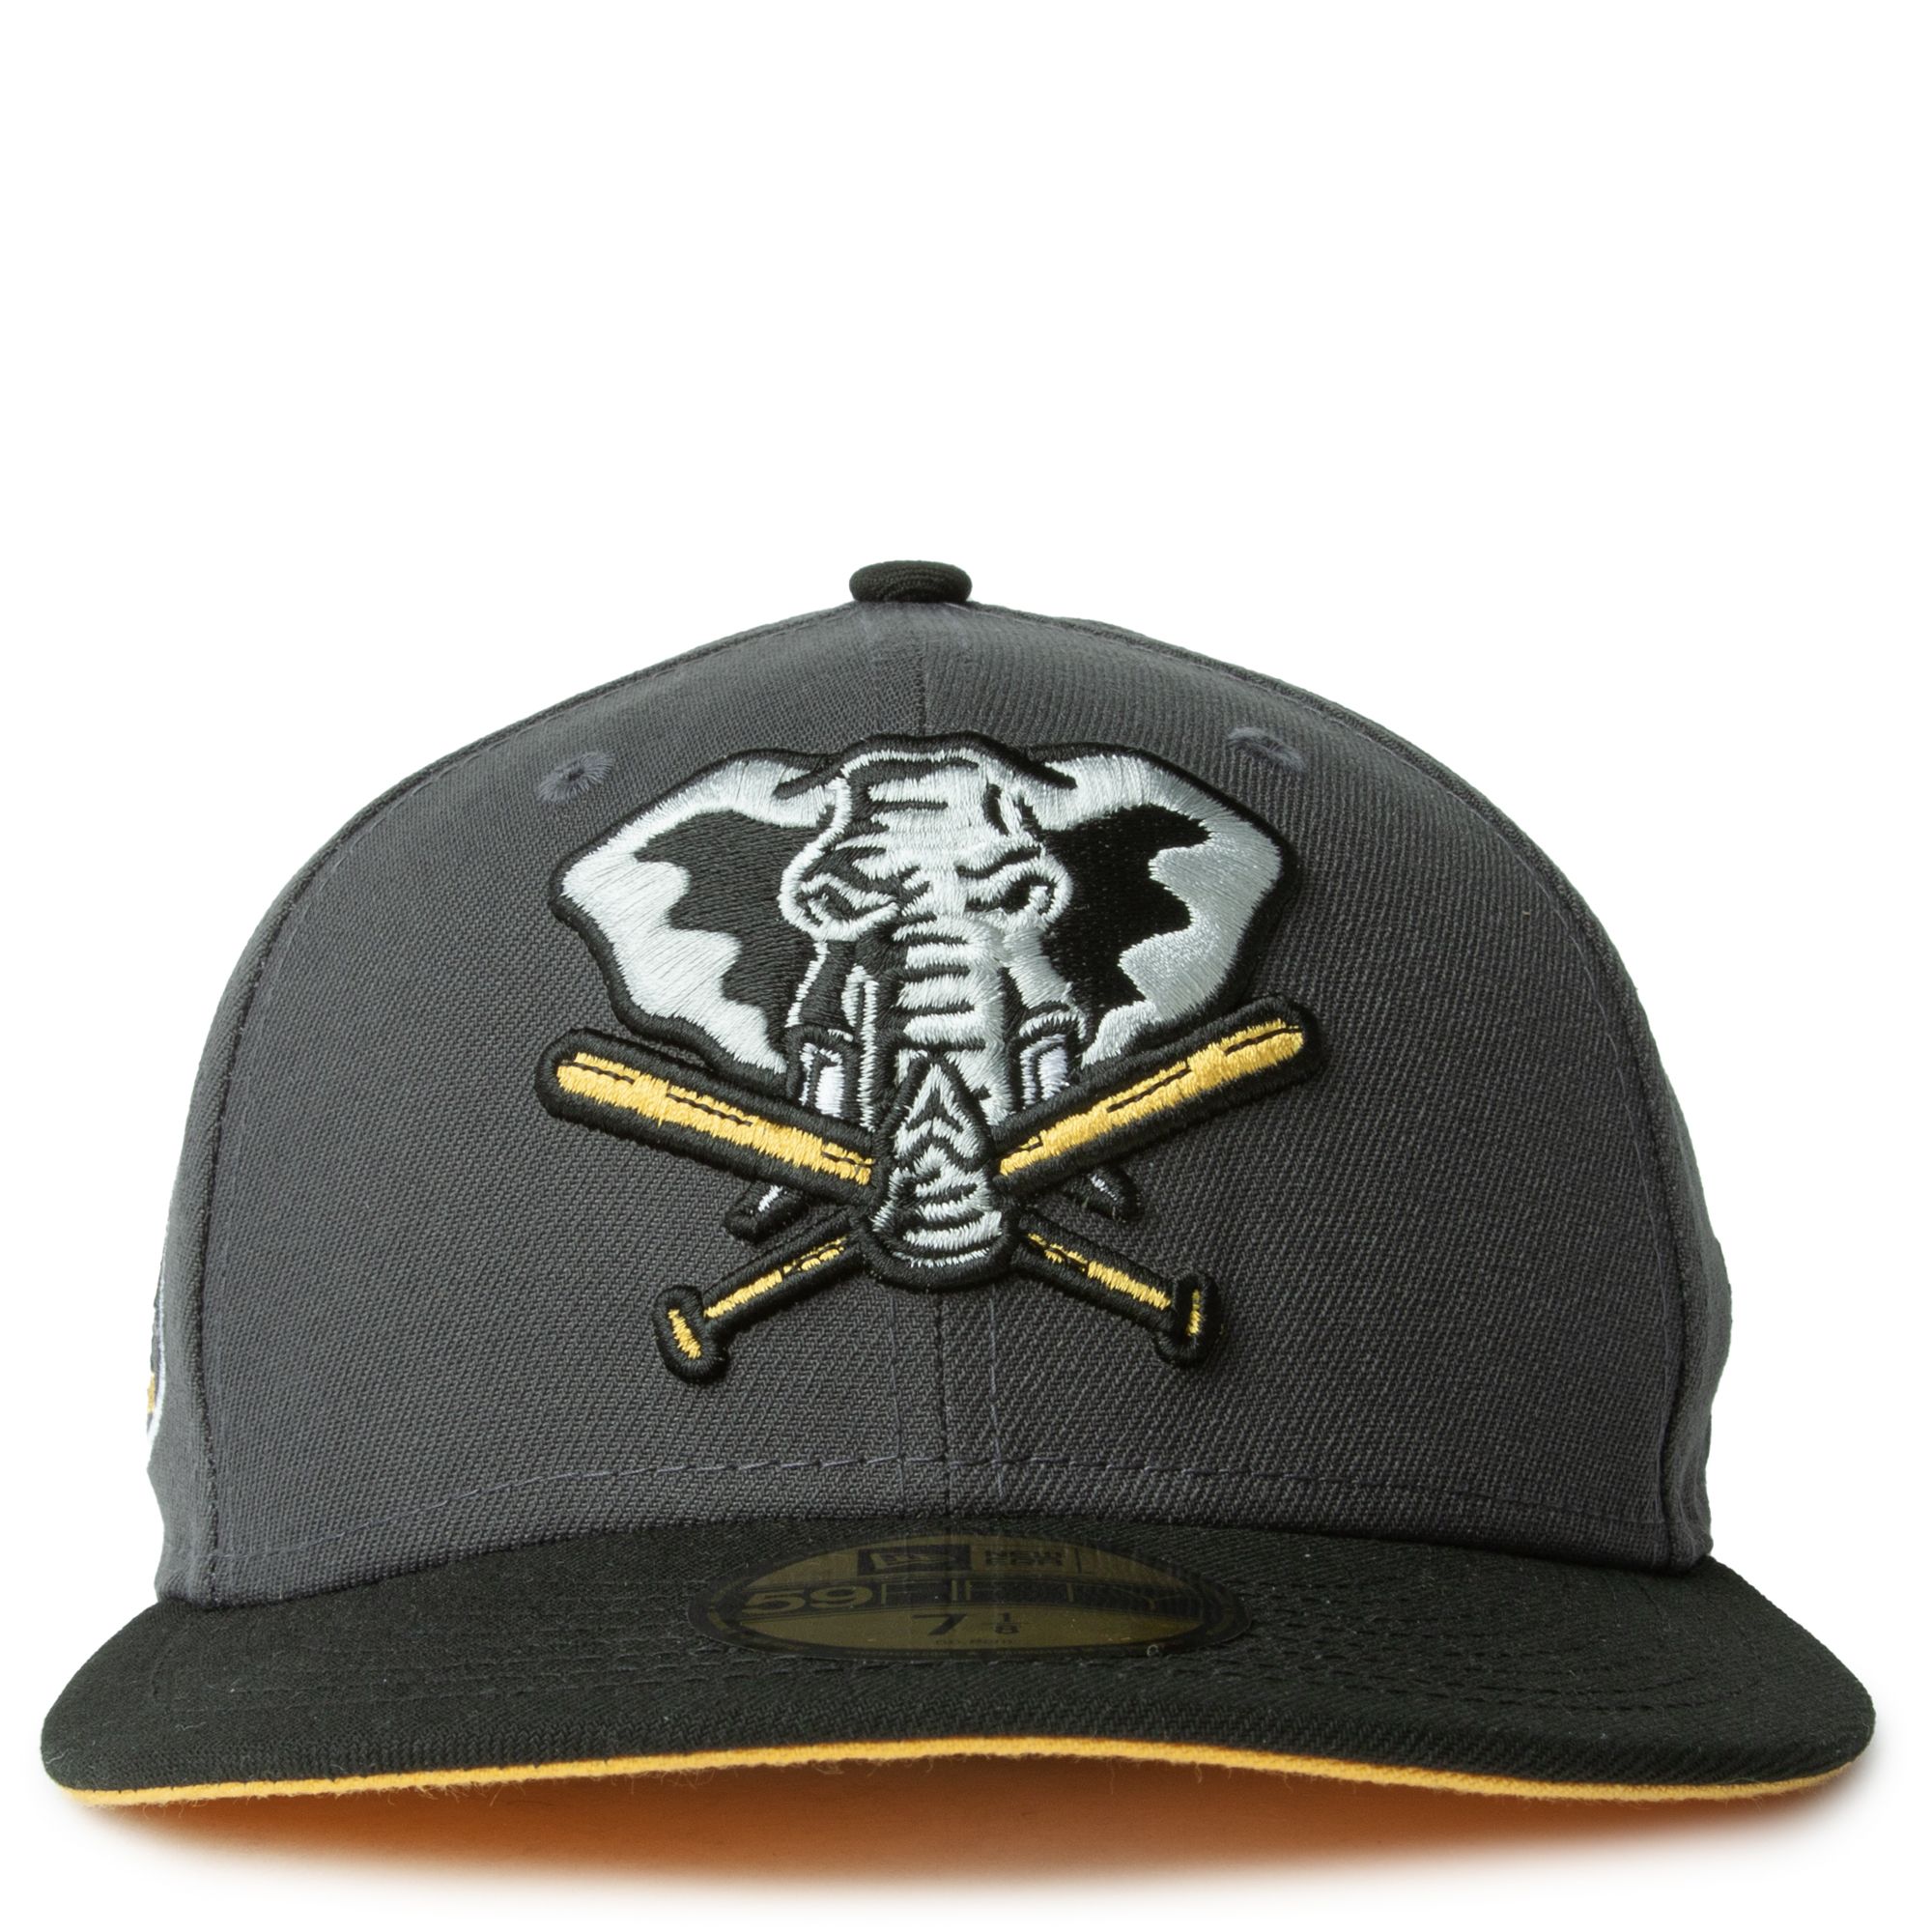 OAKLAND ATHLETICS BLACK GRAY 59FIFTY FITTED HAT 70740320